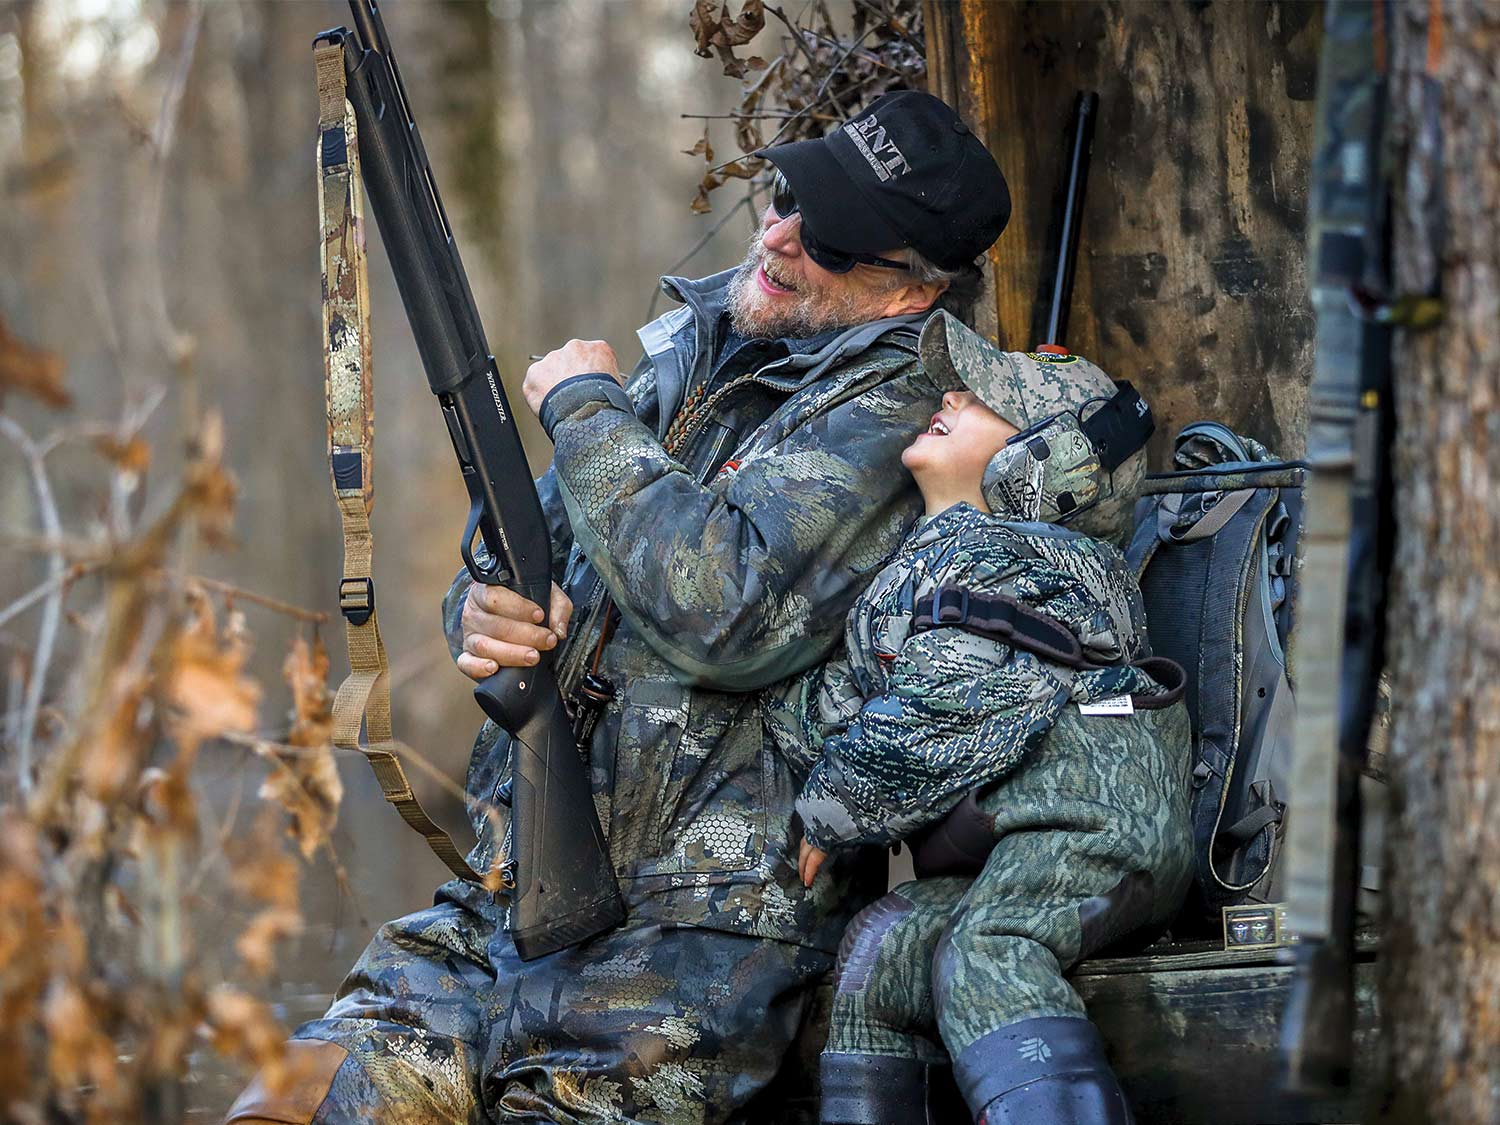 An elderly gentleman holding a rifle laughs and smiles with his grandchild in a tree stand.